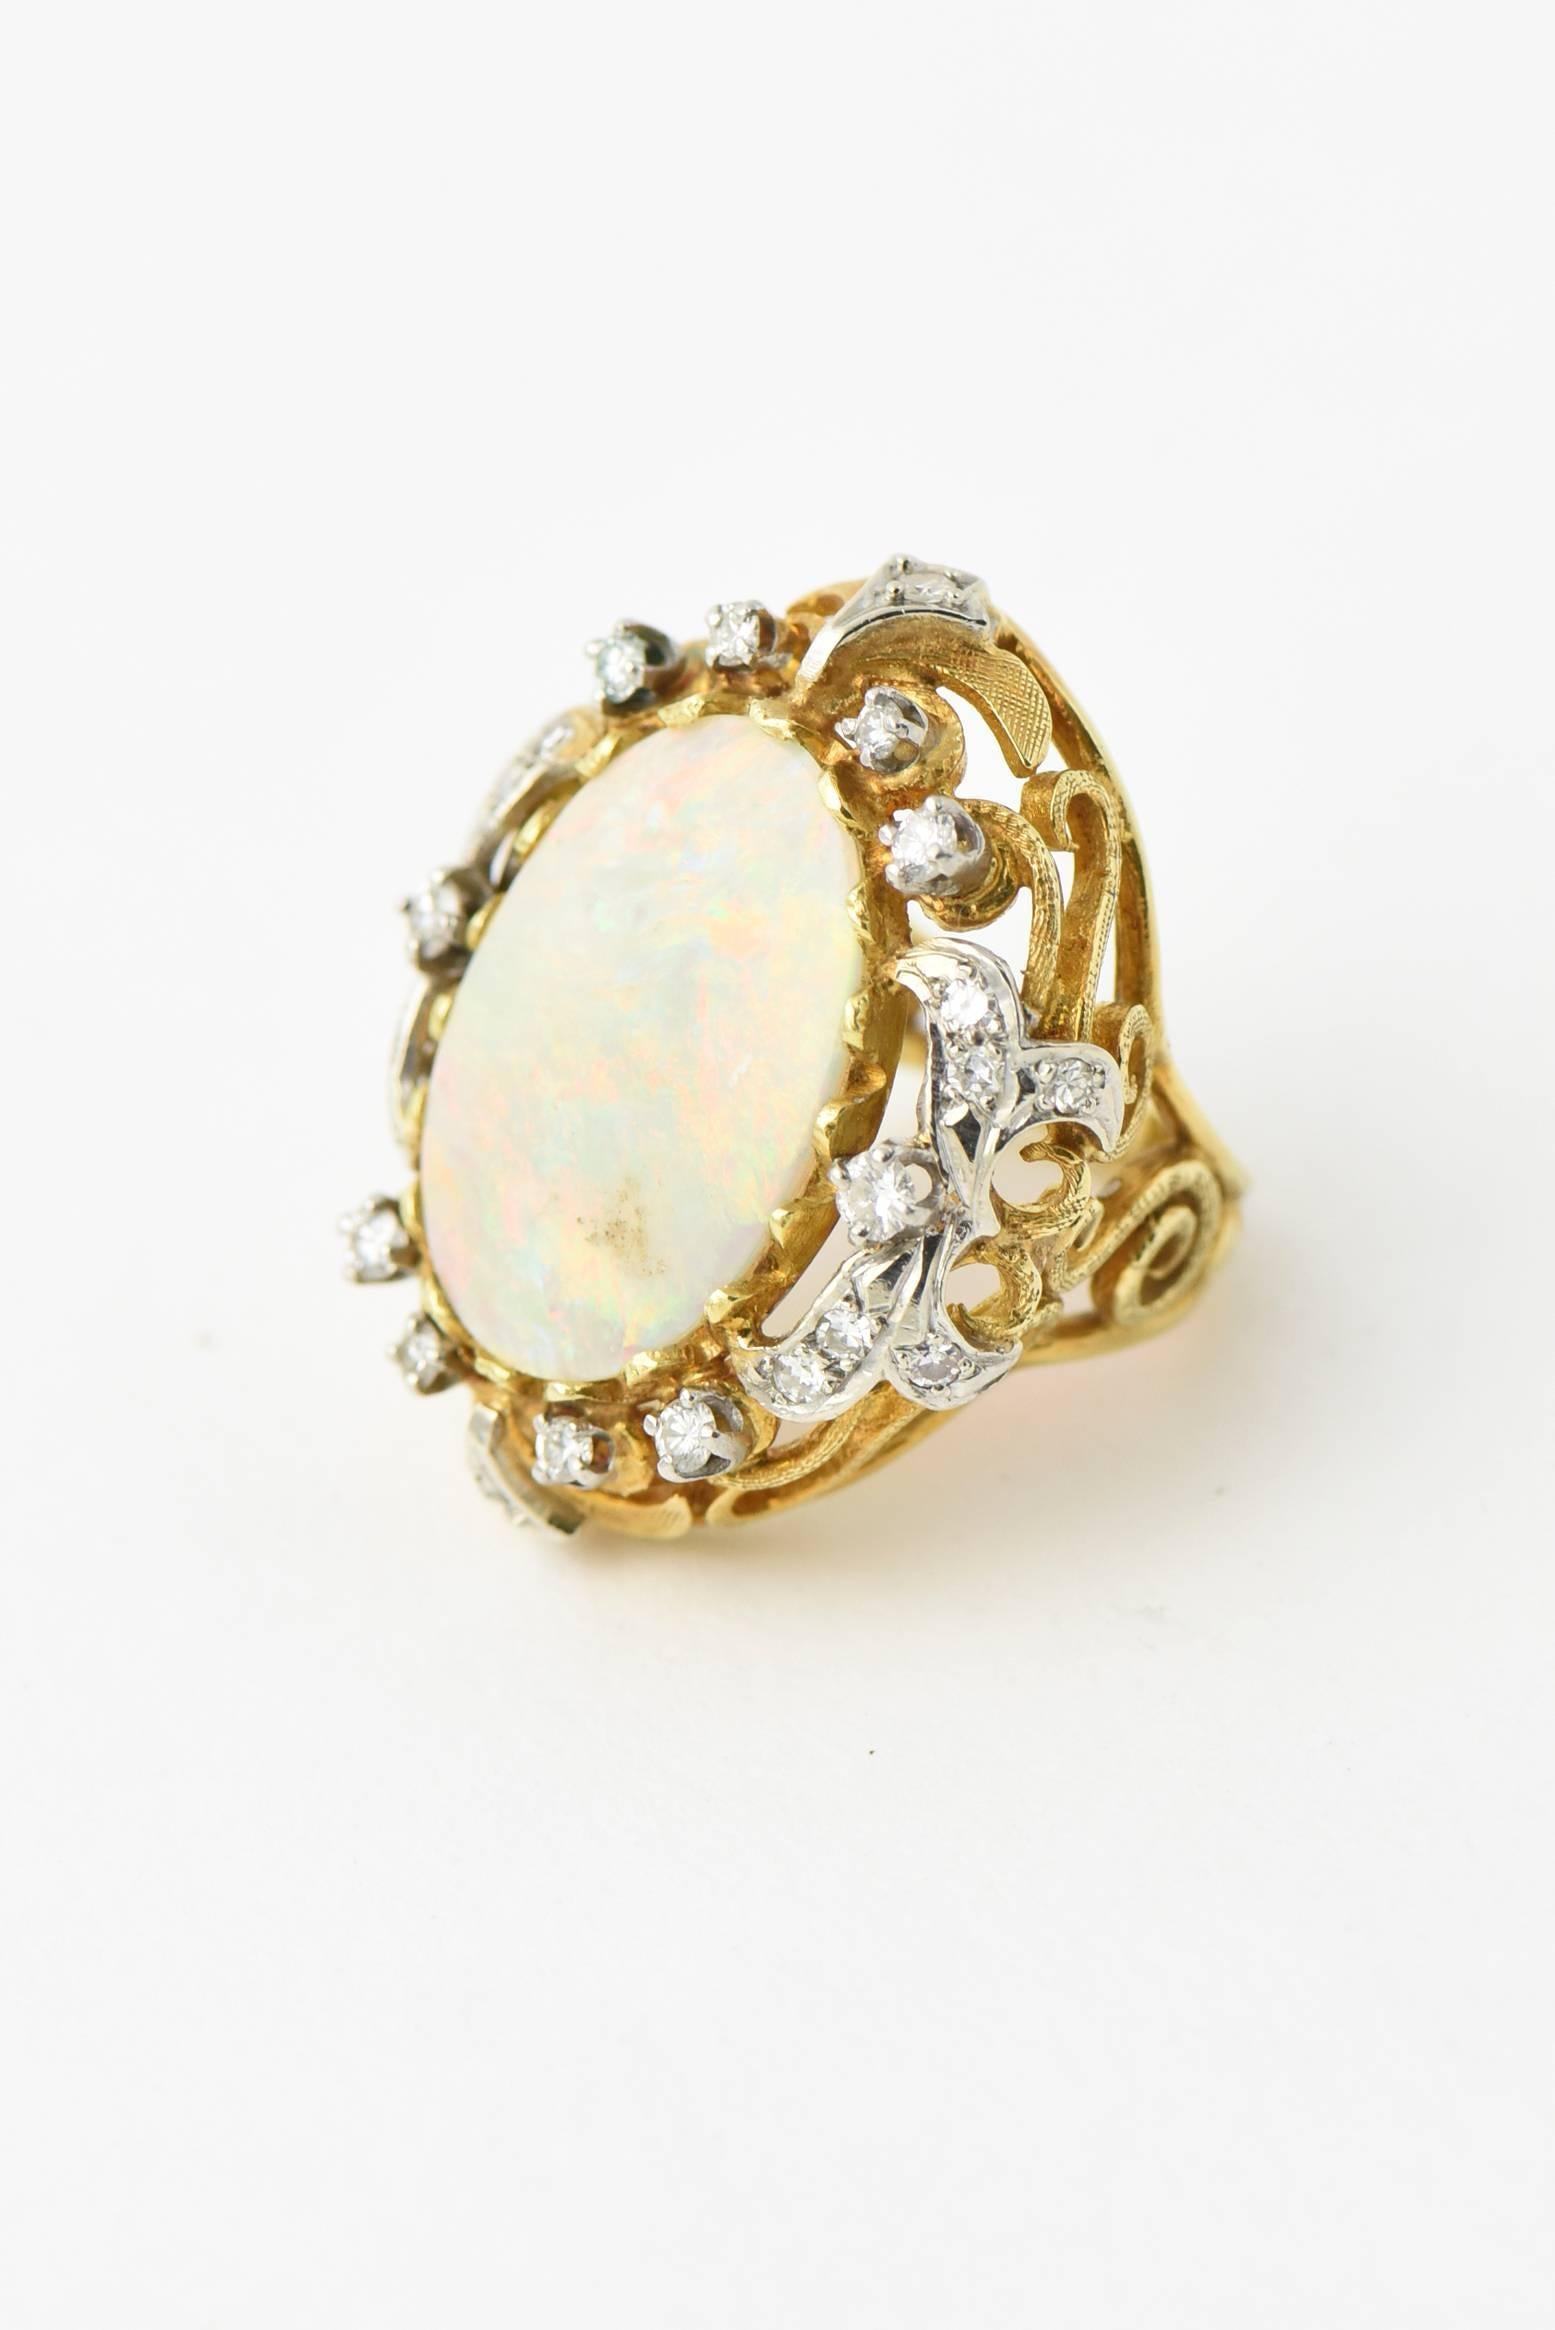 Brillant Australian 12 carat plus gray opal with beautiful flashes of colors in shades of reds, greens, blues and yellows.  The opal is accented by approximately 1 carat of diamonds mounted in a handmade openwork scroll ring.

US size 4.75.